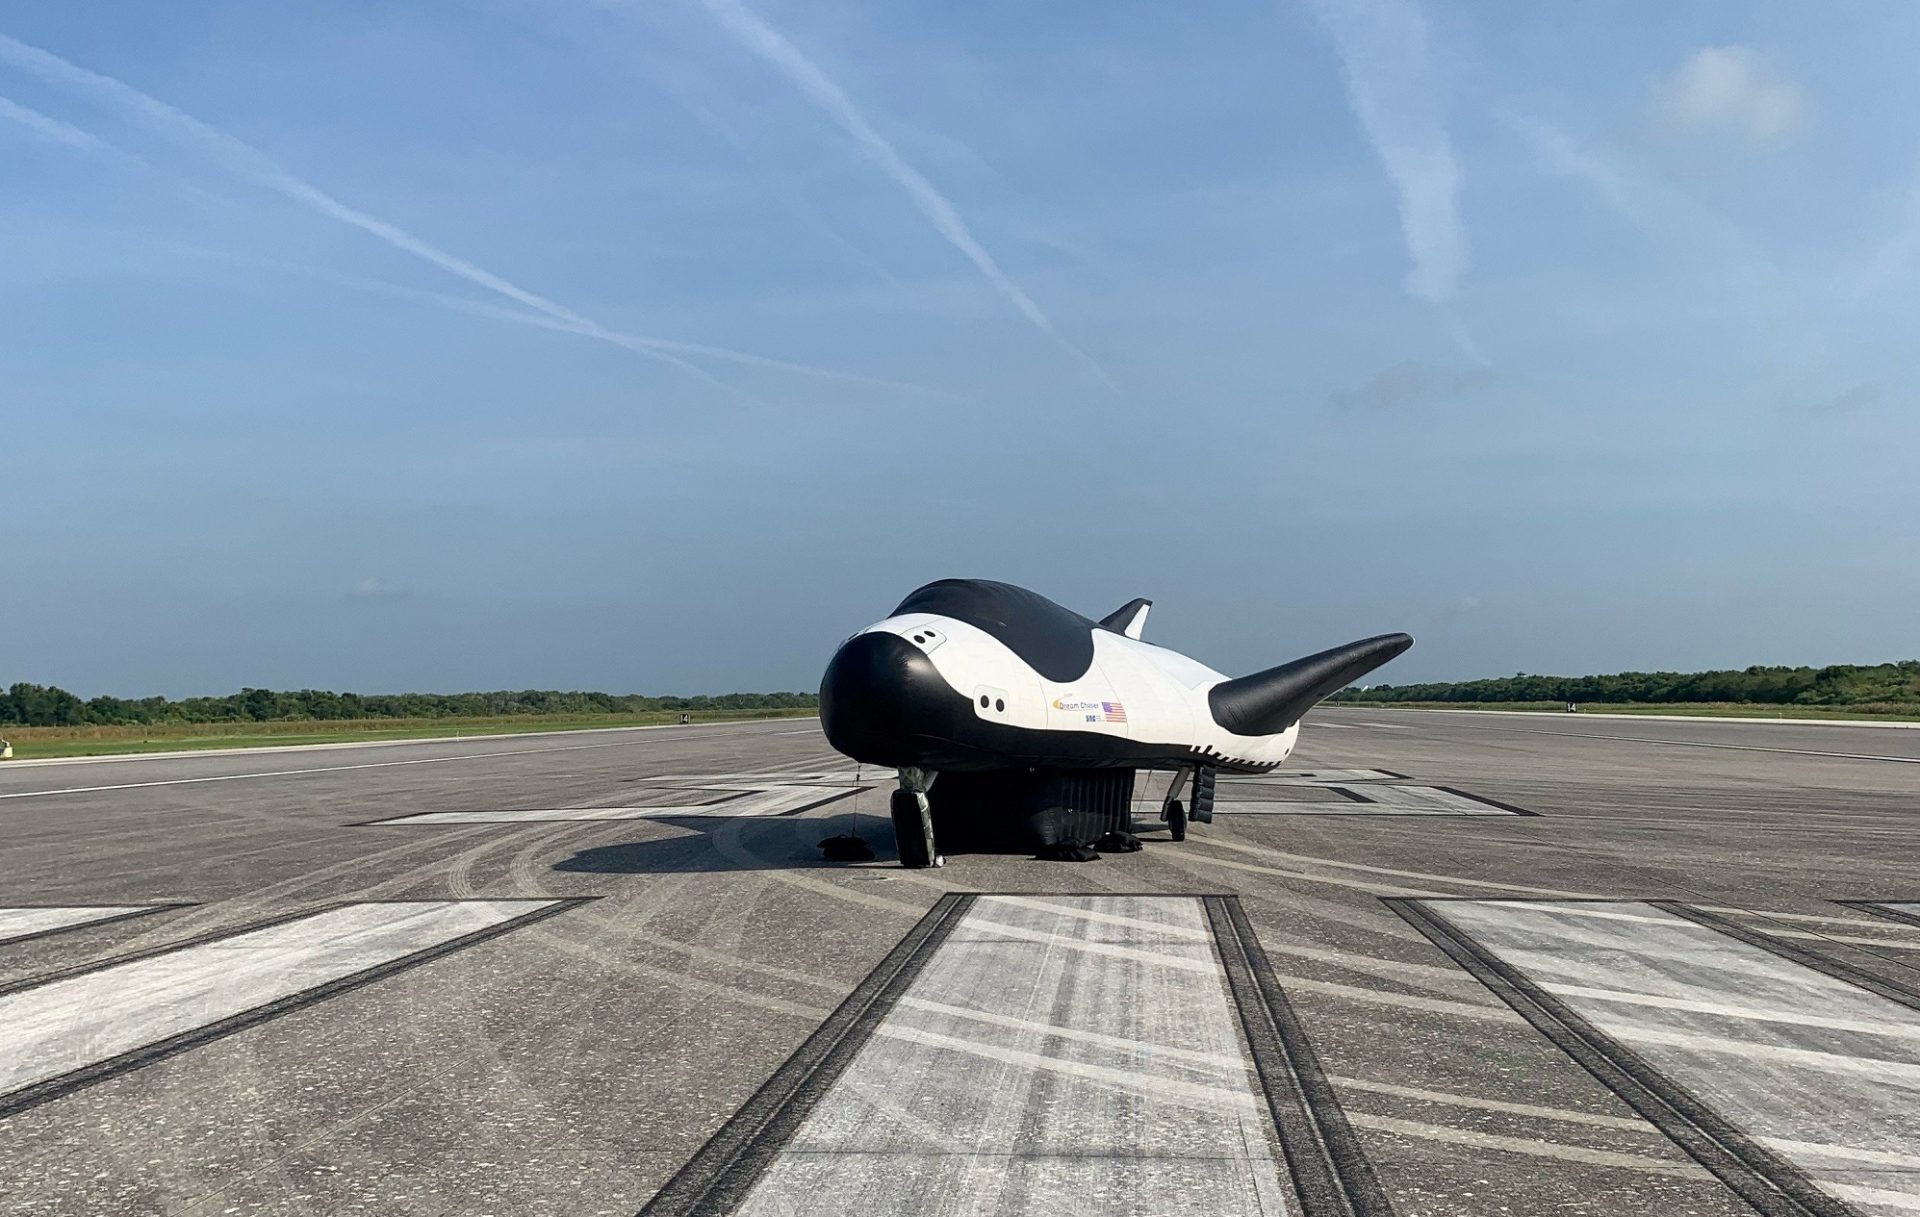 Personal Dream Chaser house plane to land on NASA’s old shuttle runway